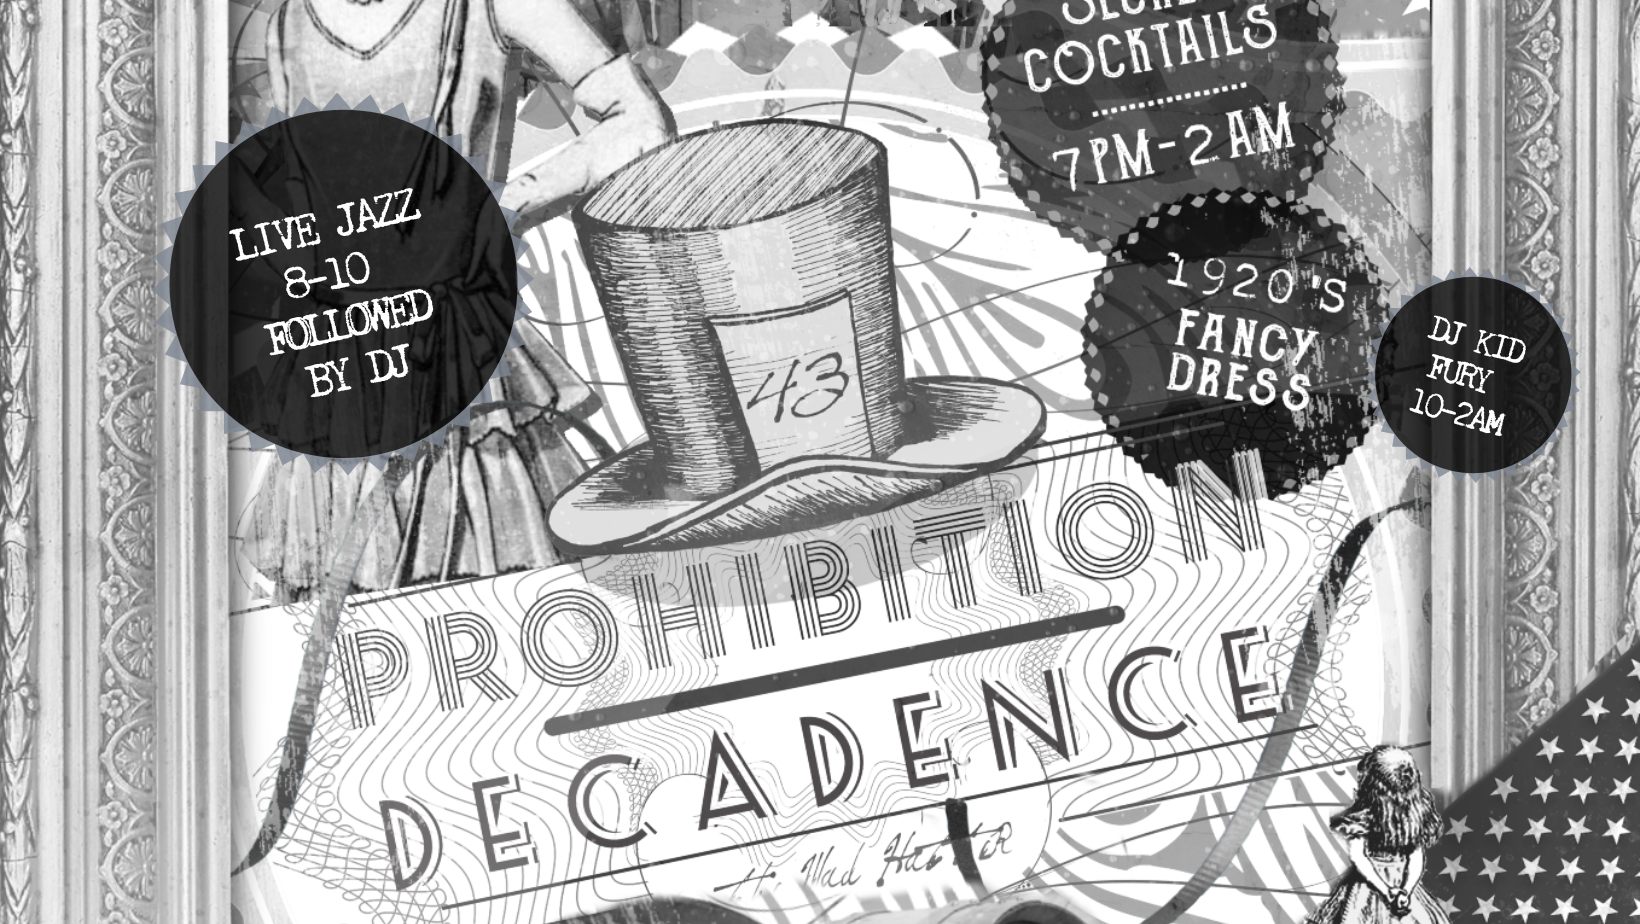 A Night of Prohibition Decadence